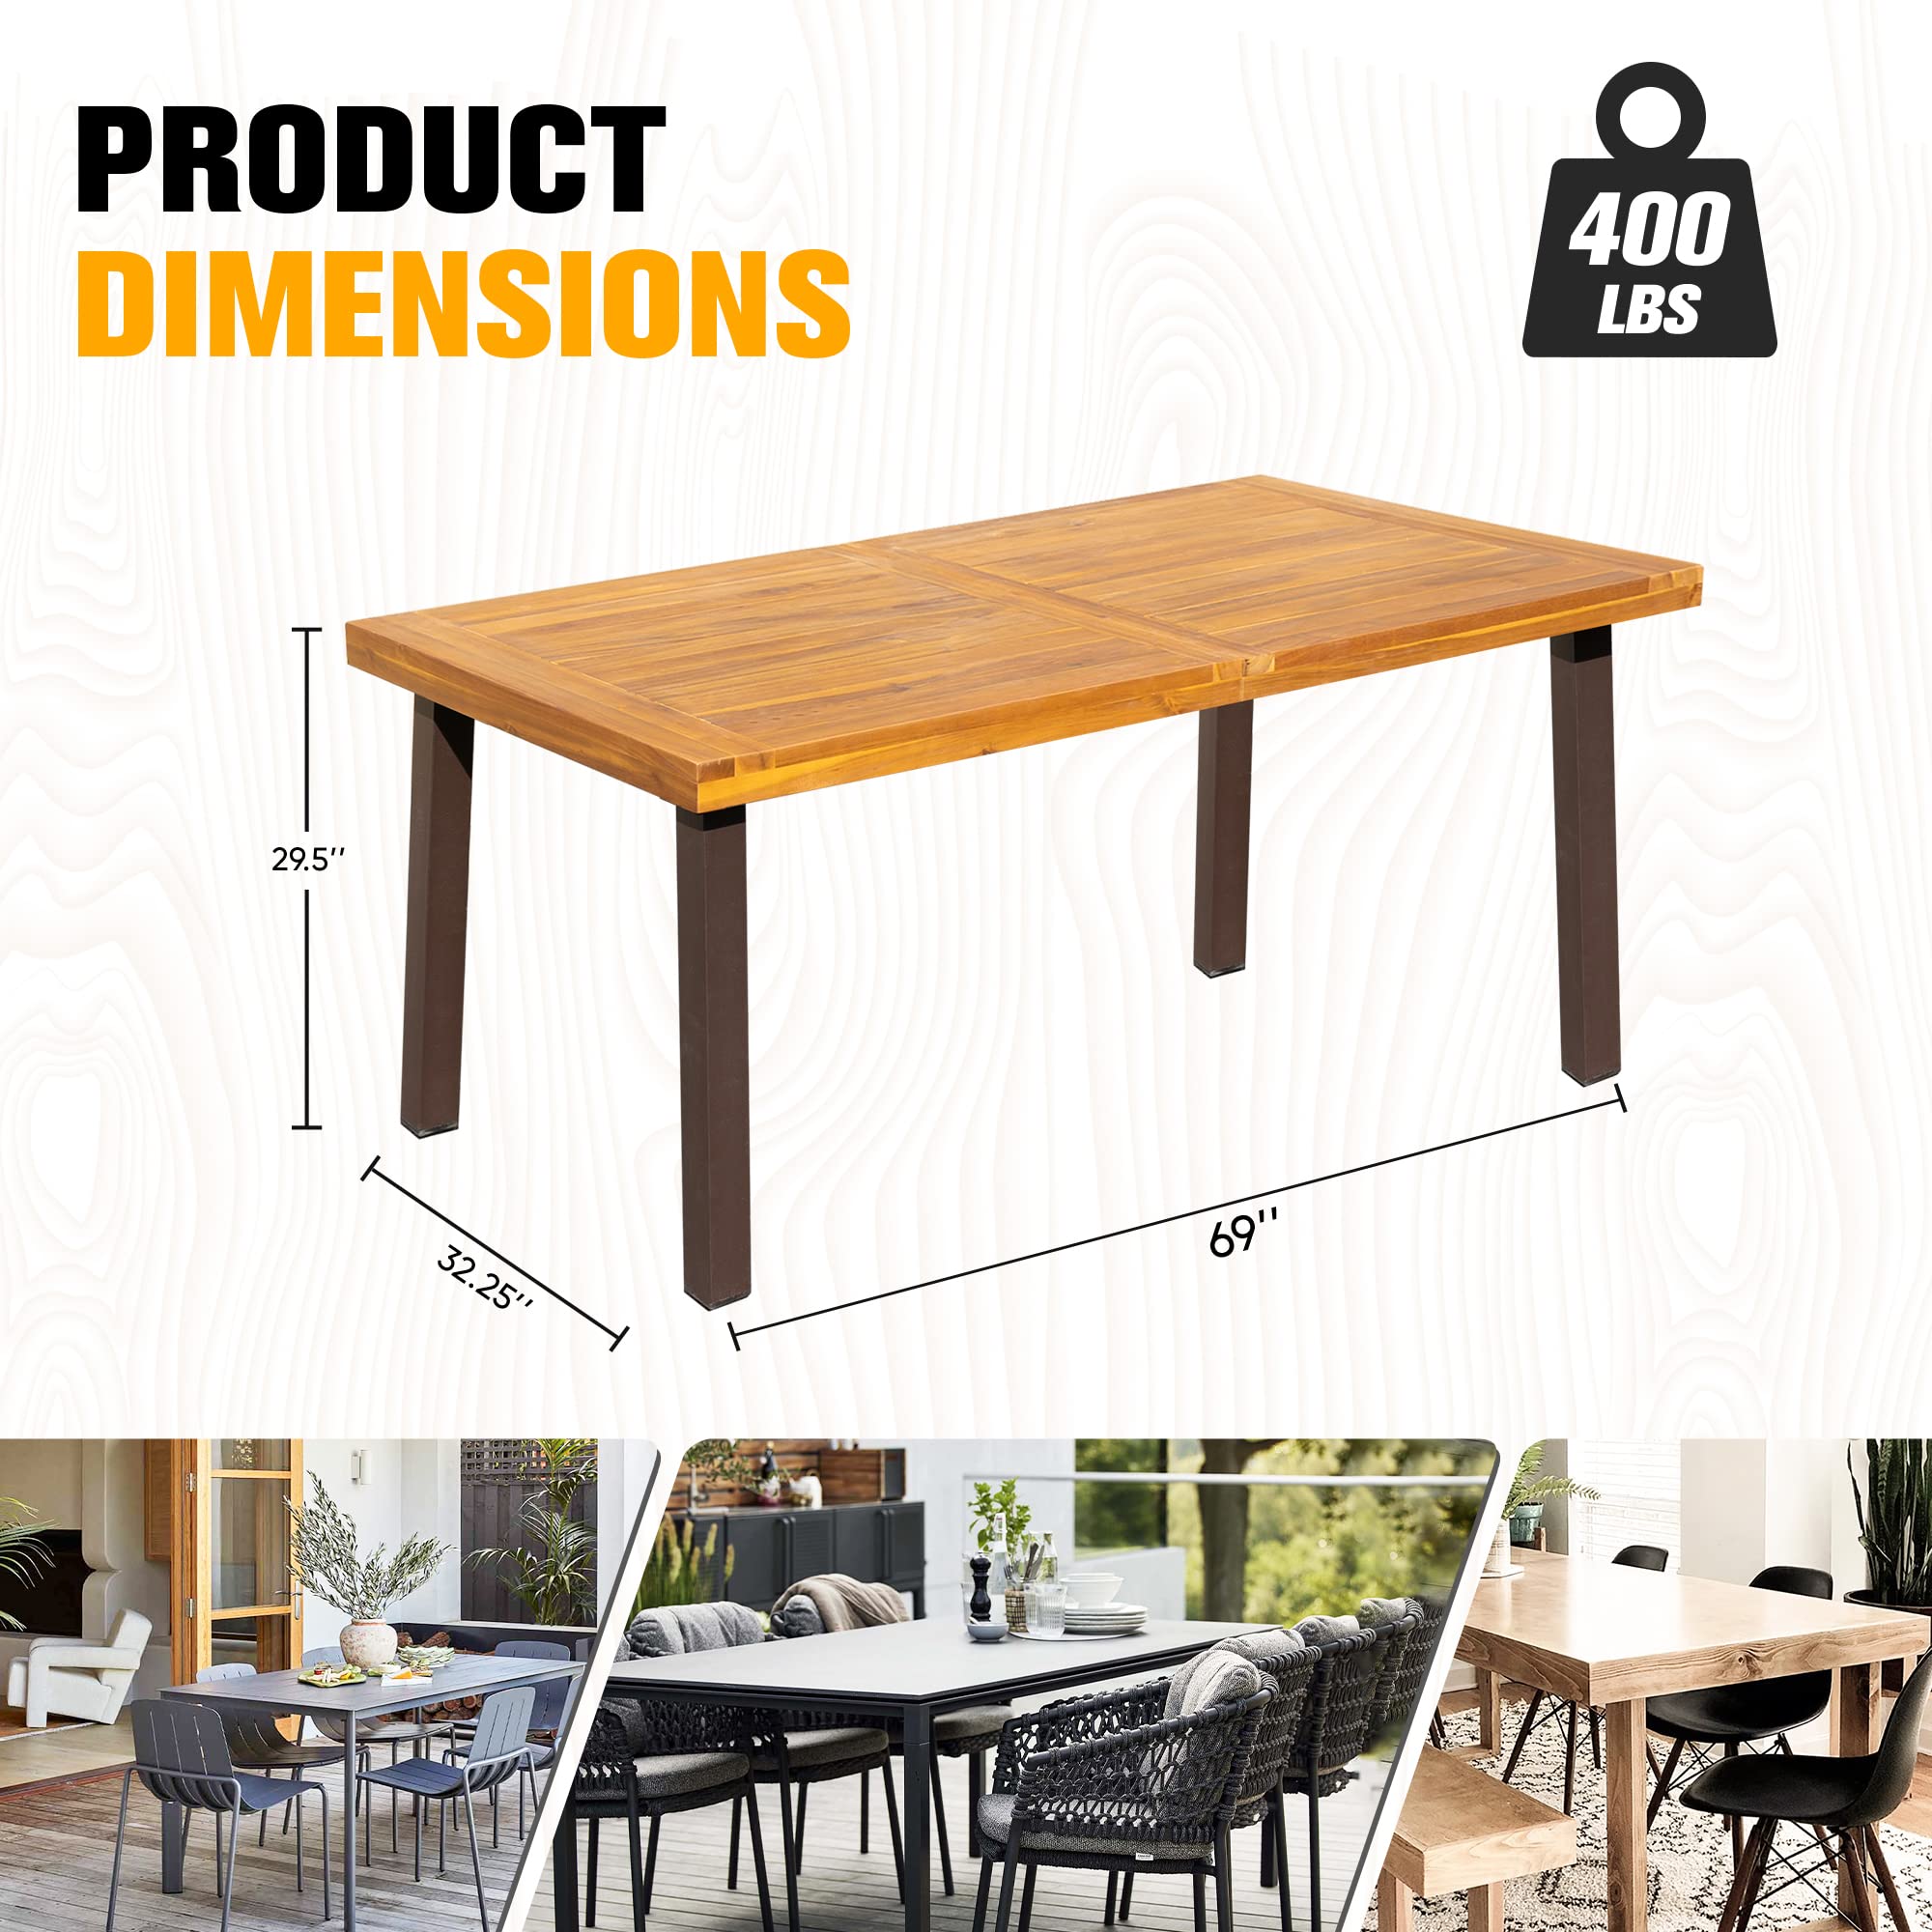 Flamaker Dining Table for 6 Acacia Wood Indoor Outdoor Home Kitchen Table with Iron Legs Large Rectangular Patio Table for Deck, Sunroom